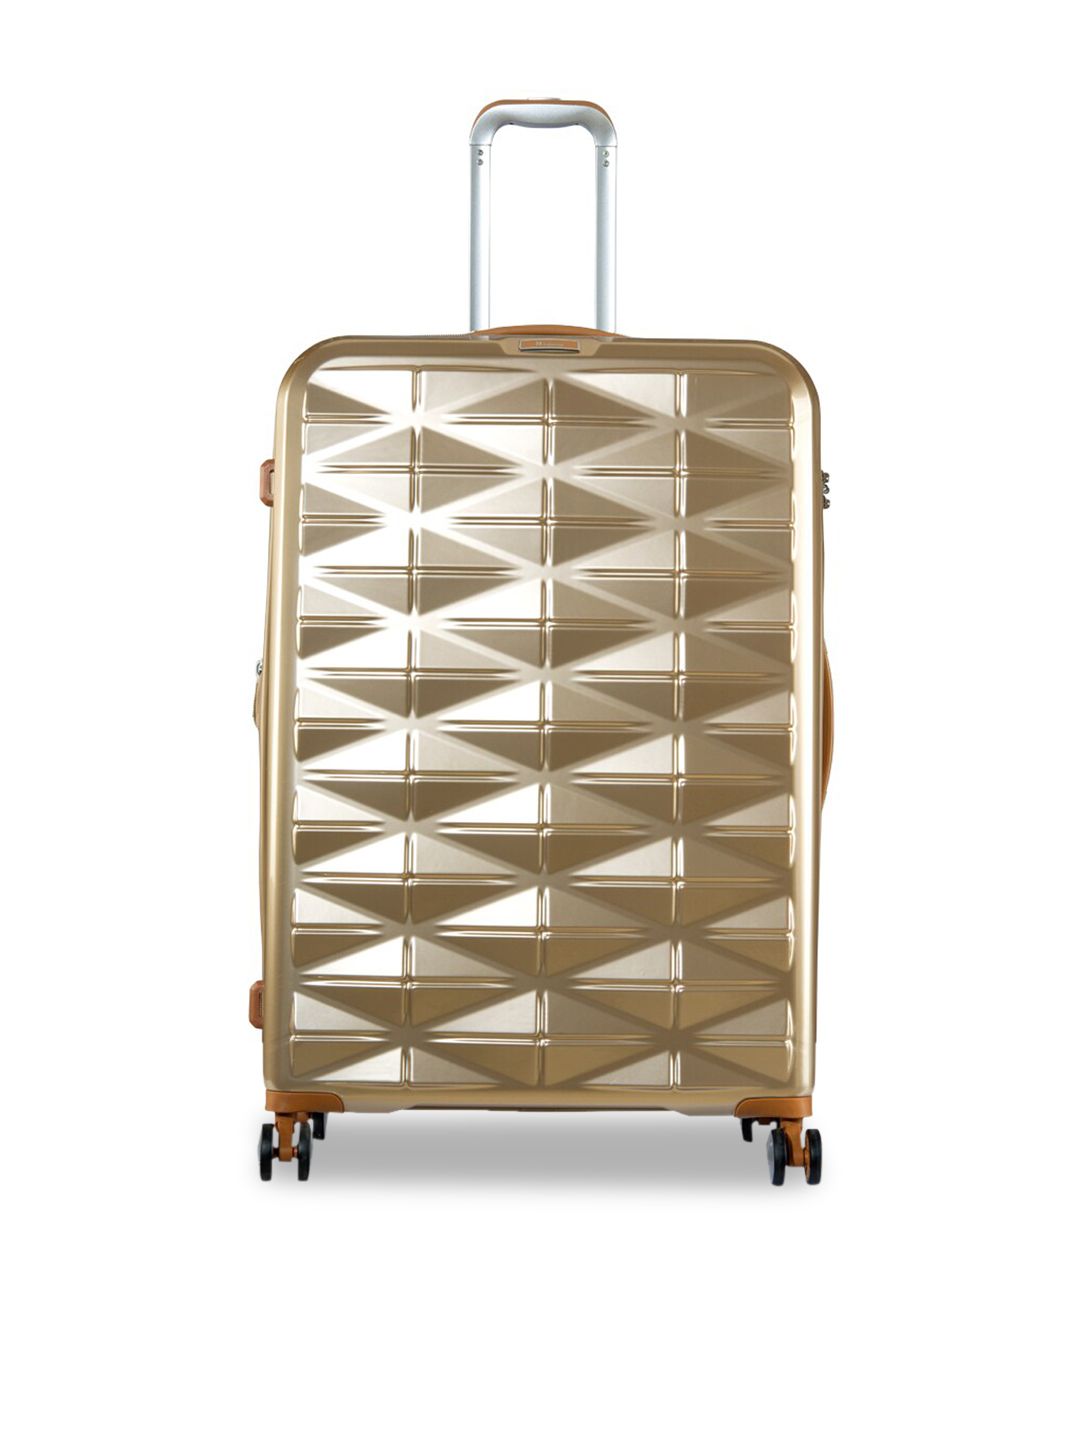 IT luggage Gold Hard Large Suitcase Expandable Cabin 8 Wheel Trolley Cream 80L Price in India